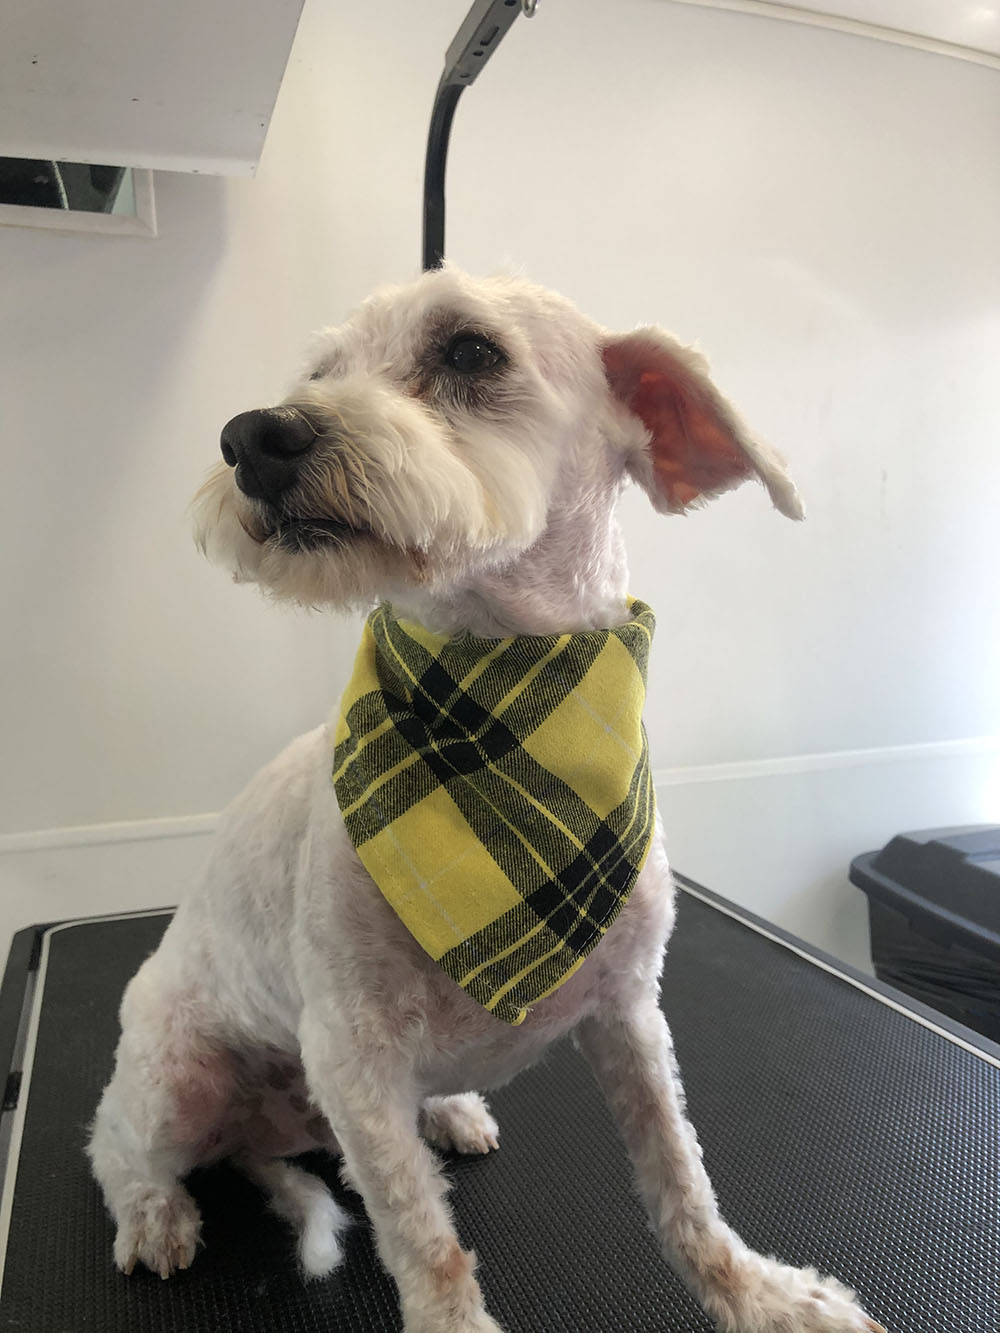 A Dog After Grooming With Yellow and Black Collar